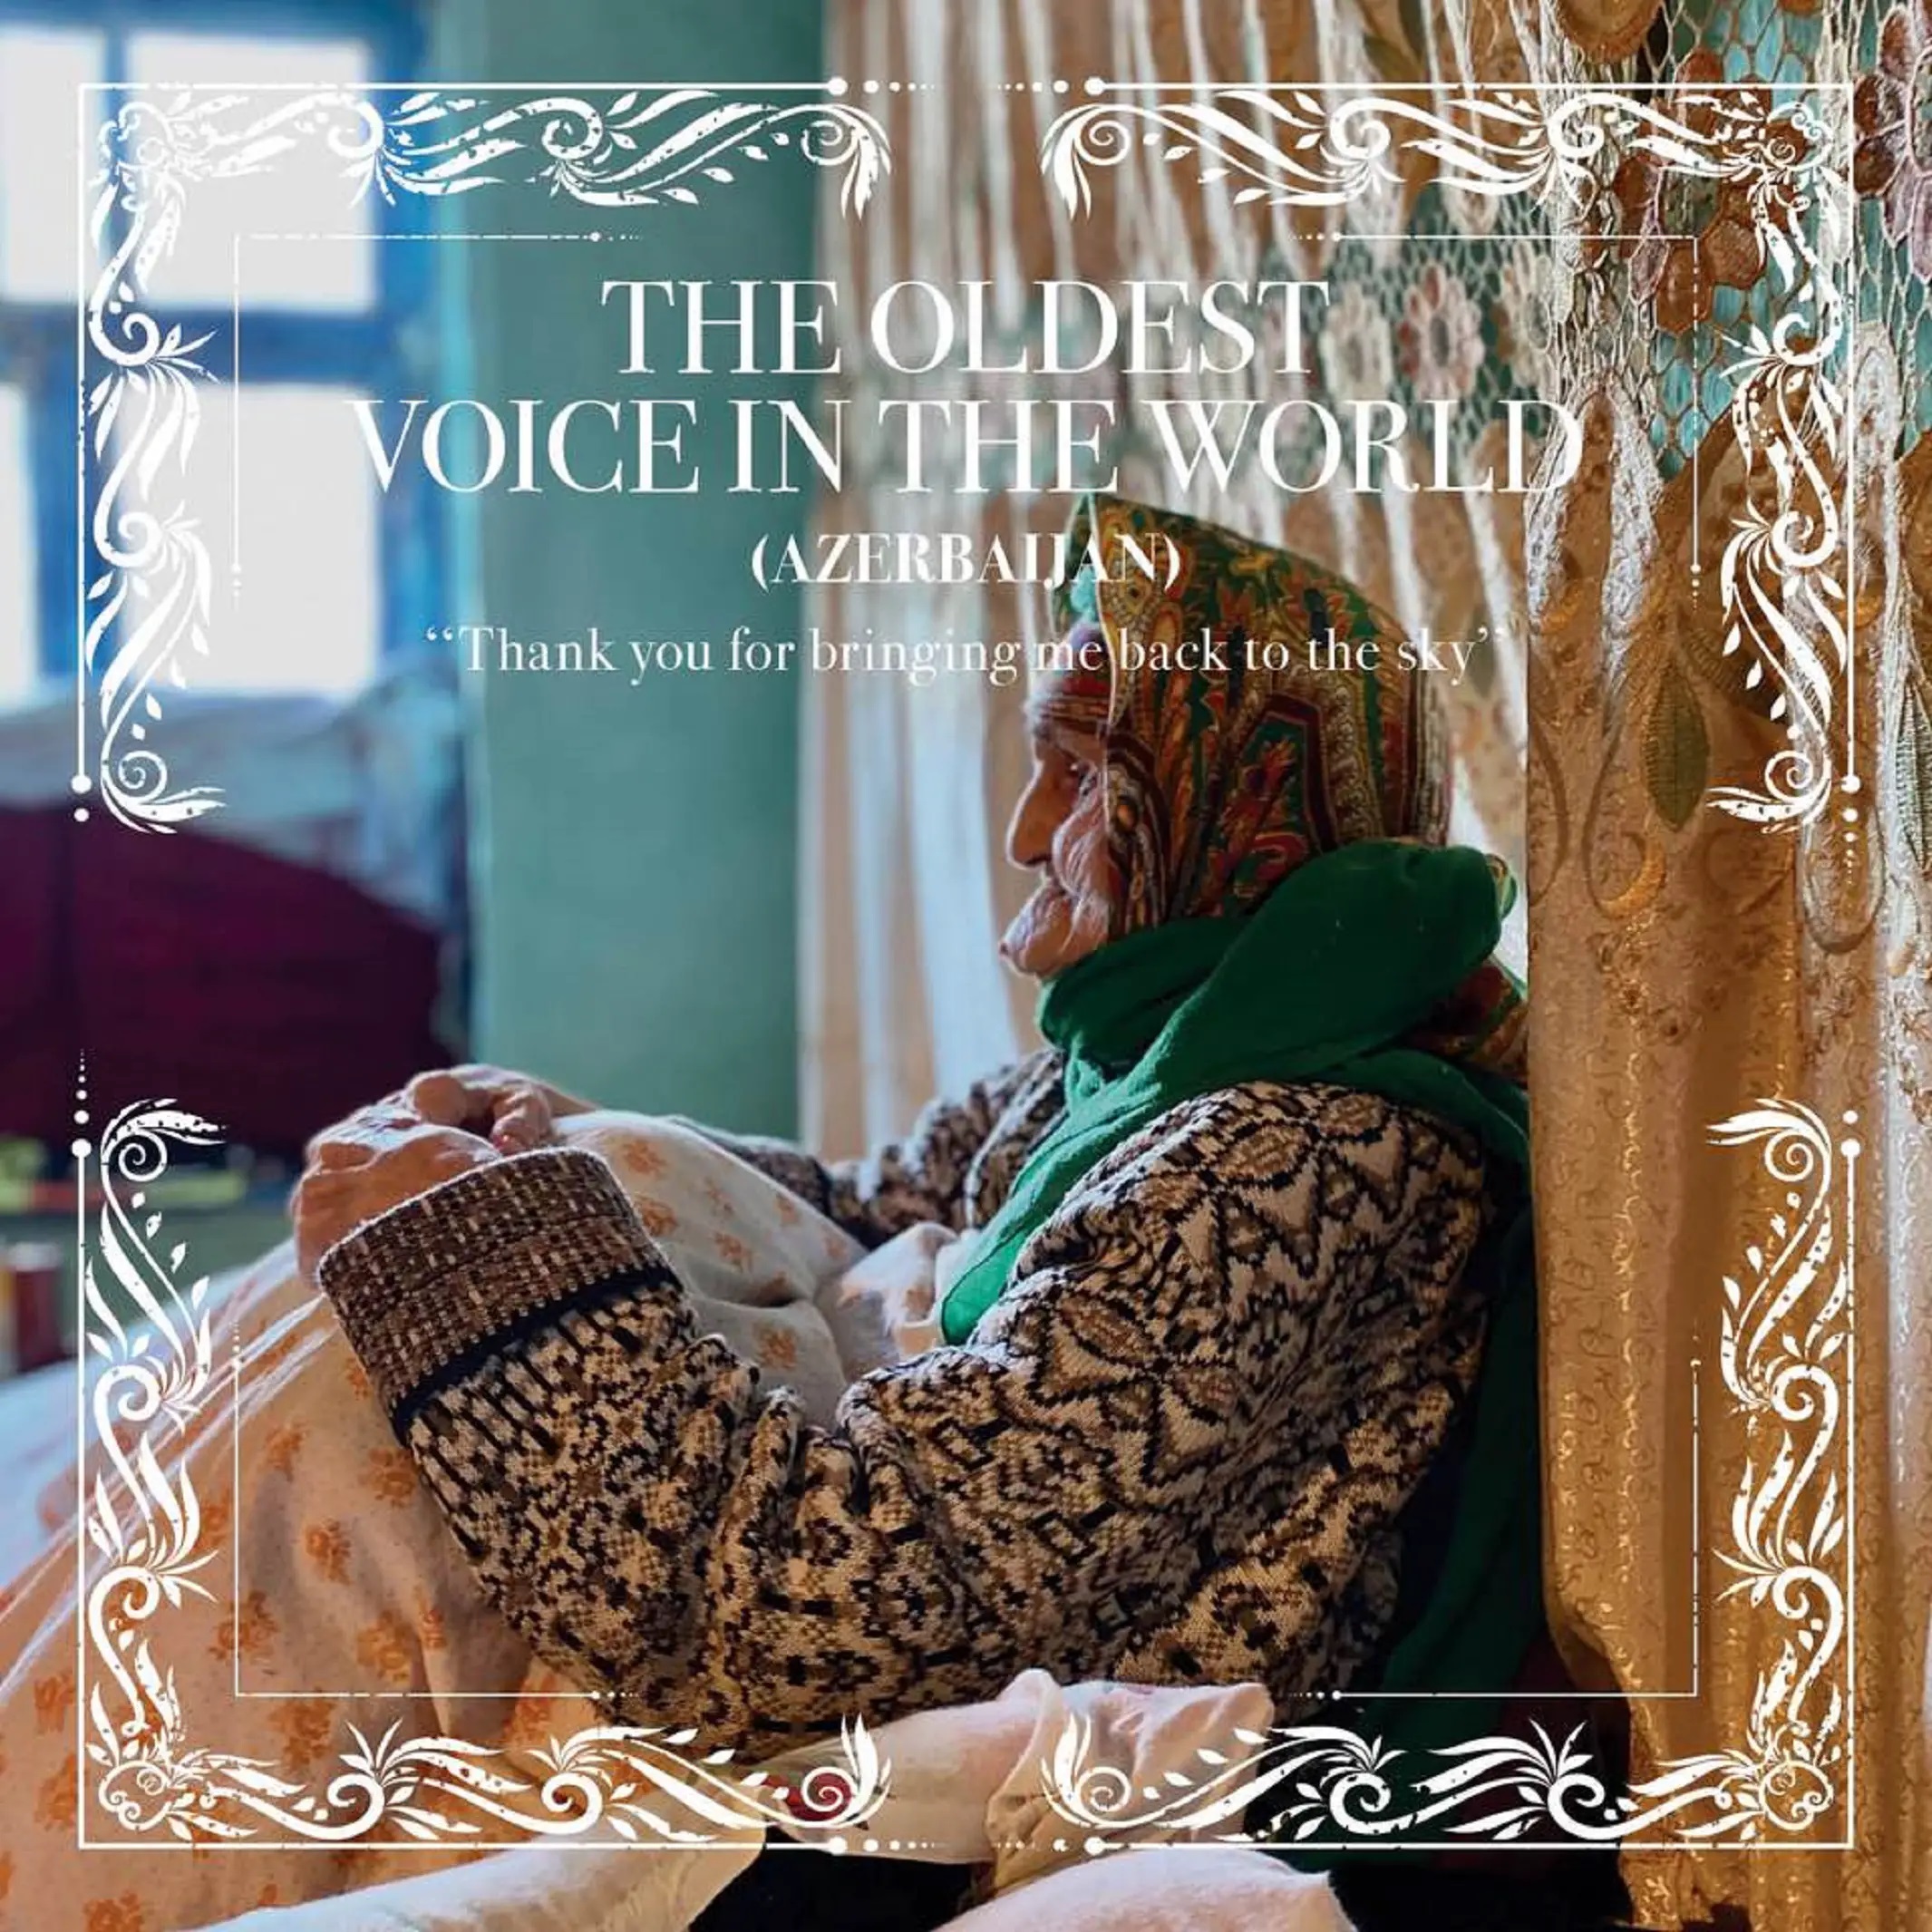 Ian Brennan's The Oldest Voice in the World (Azerbaijan) “Thank you for bringing me back to the sky” is out now